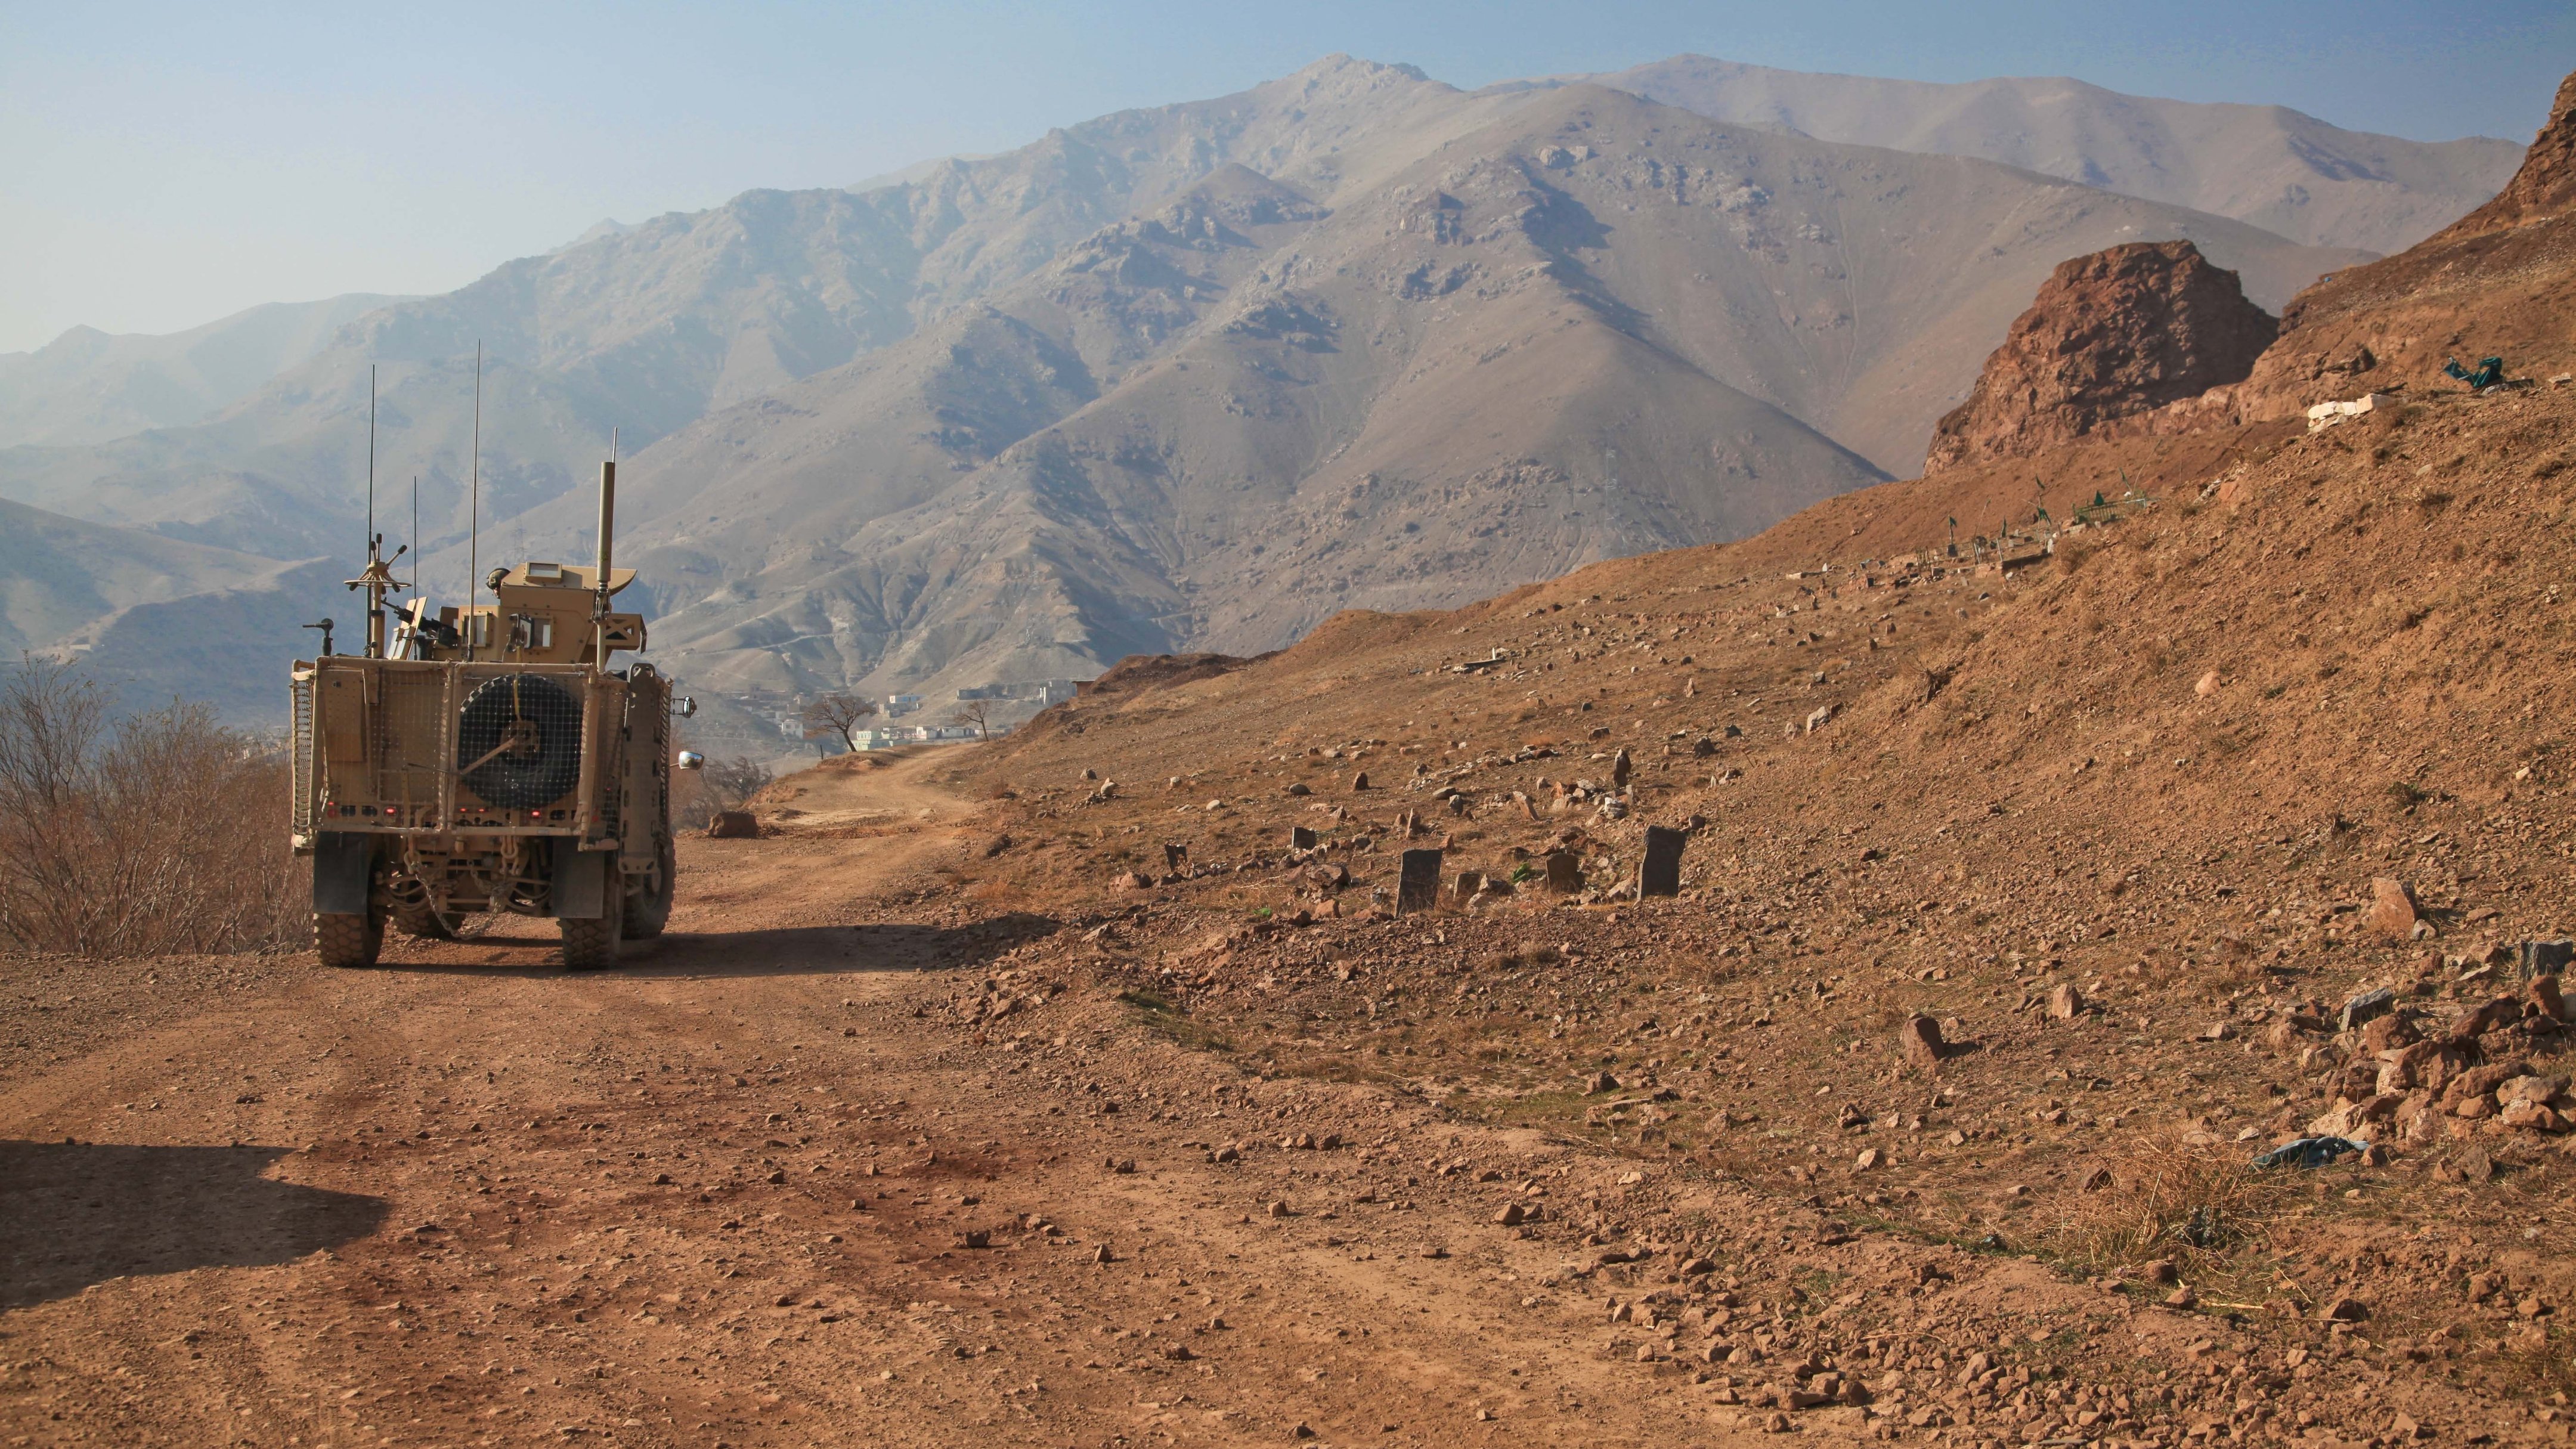 An armoured vehicle in the Afghan desert